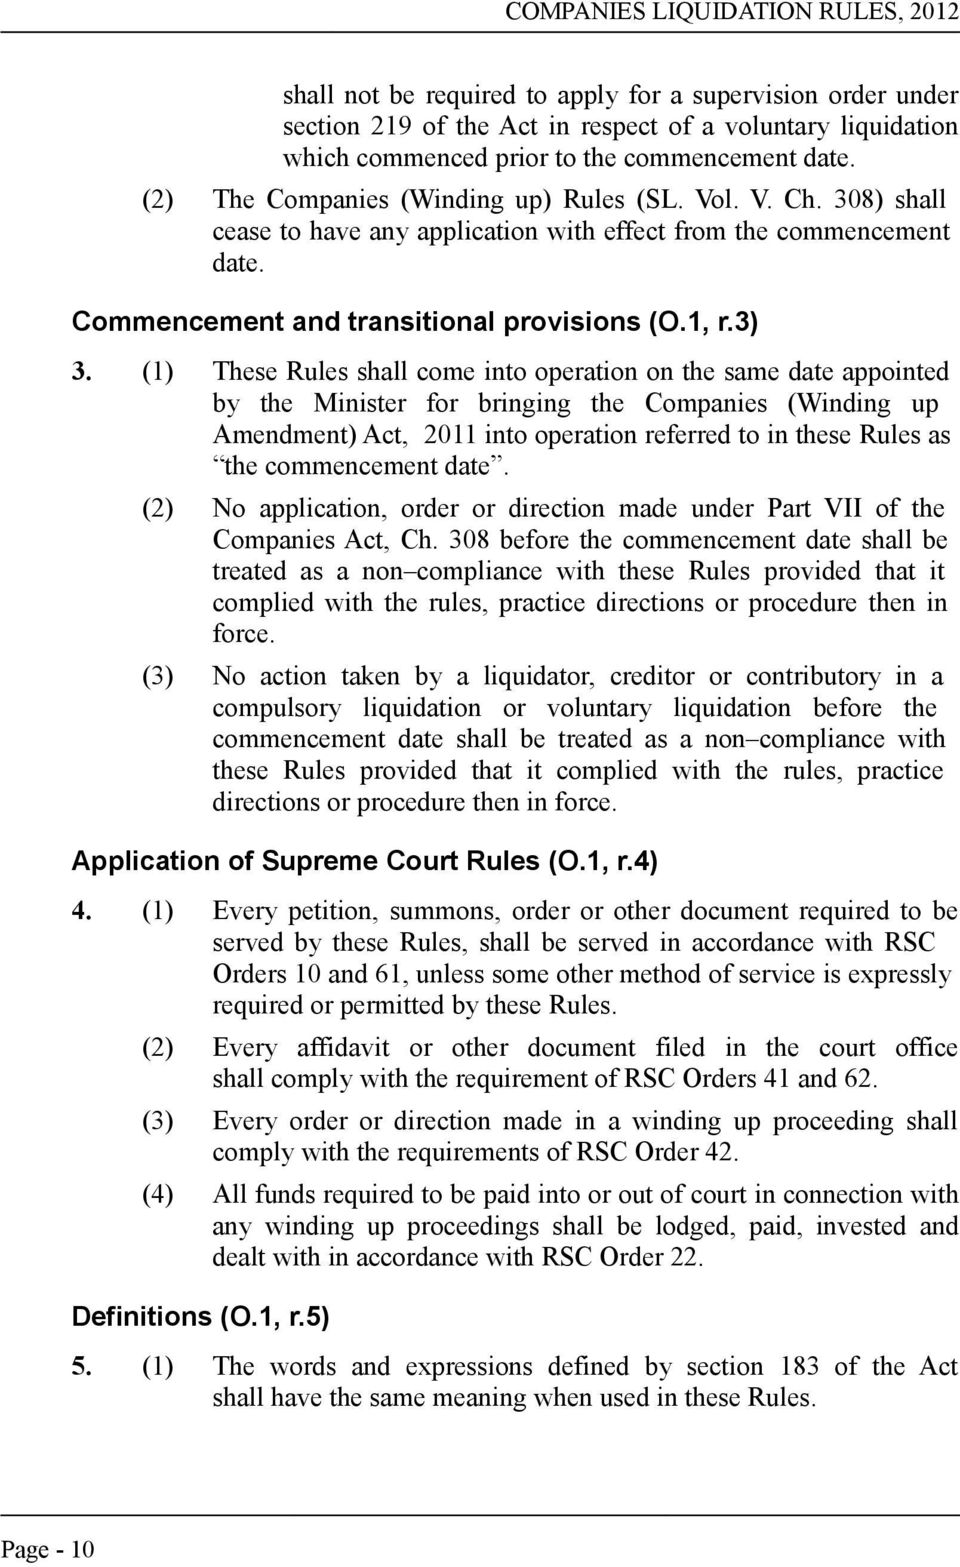 (1) These Rules shall come into operation on the same date appointed by the Minister for bringing the Companies (Winding up Amendment) Act, 2011 into operation referred to in these Rules as the